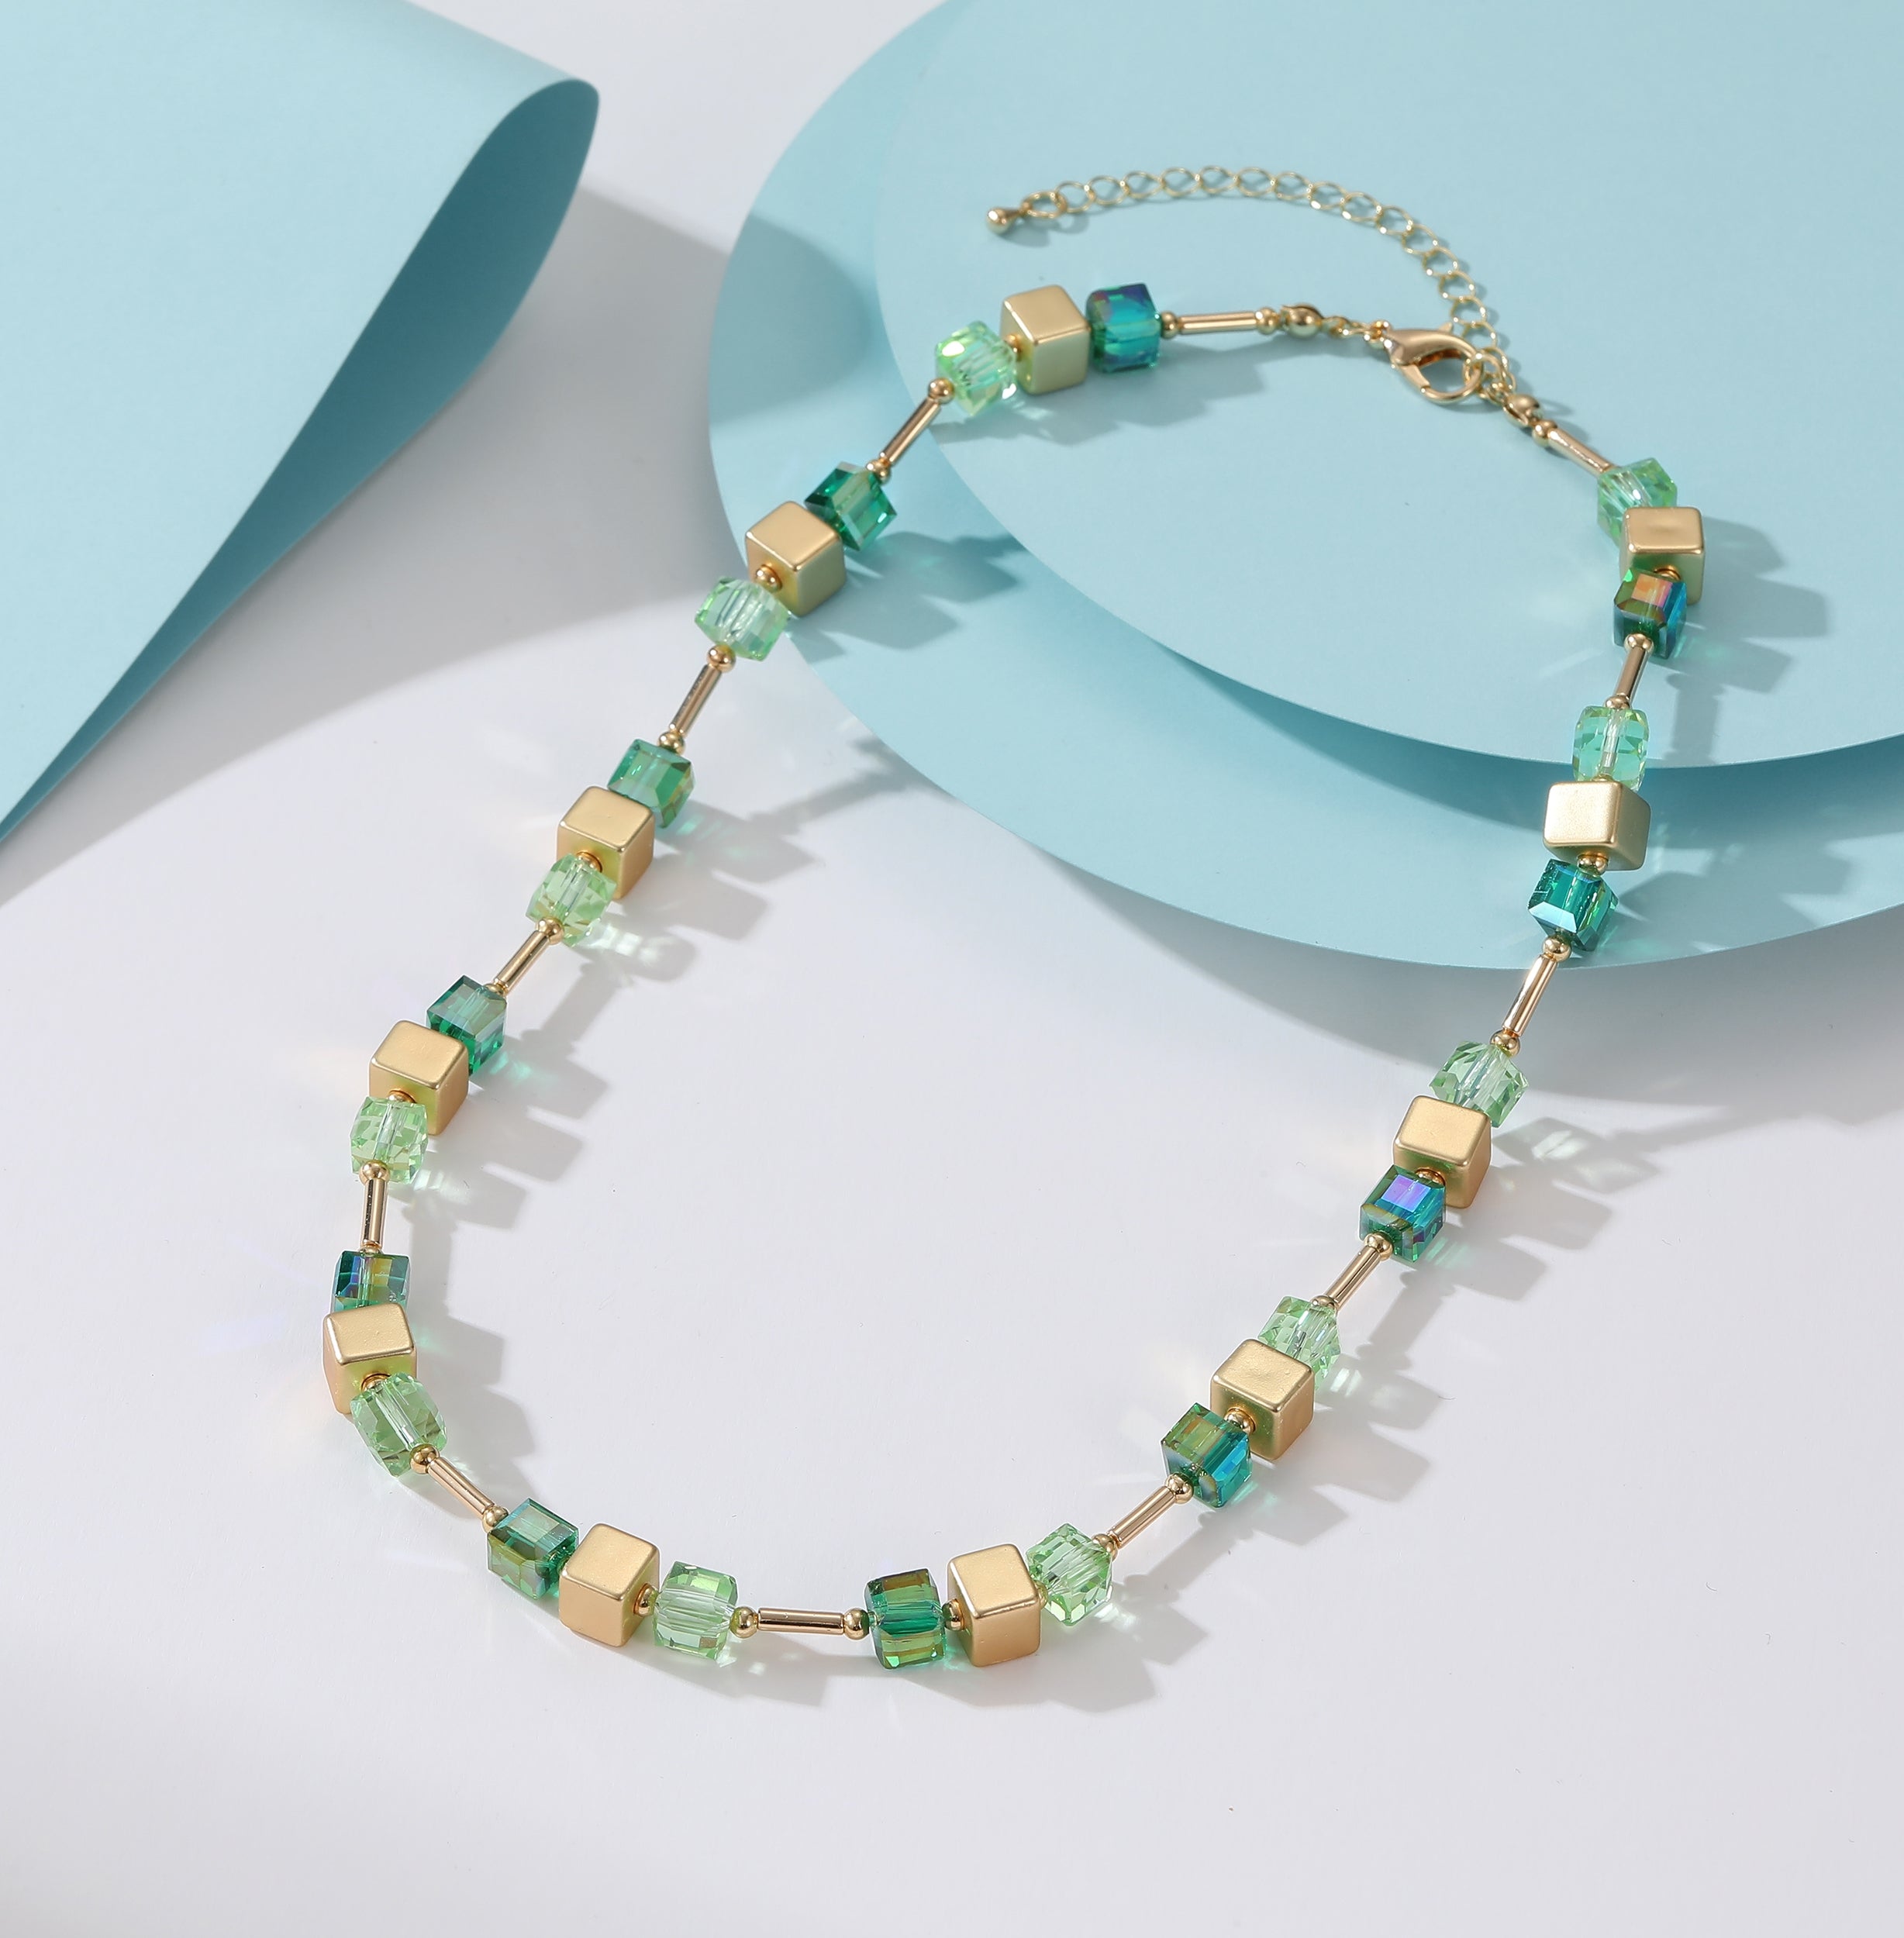 Short necklace with gold chain and aqua blue, gold and light green natural stone stations